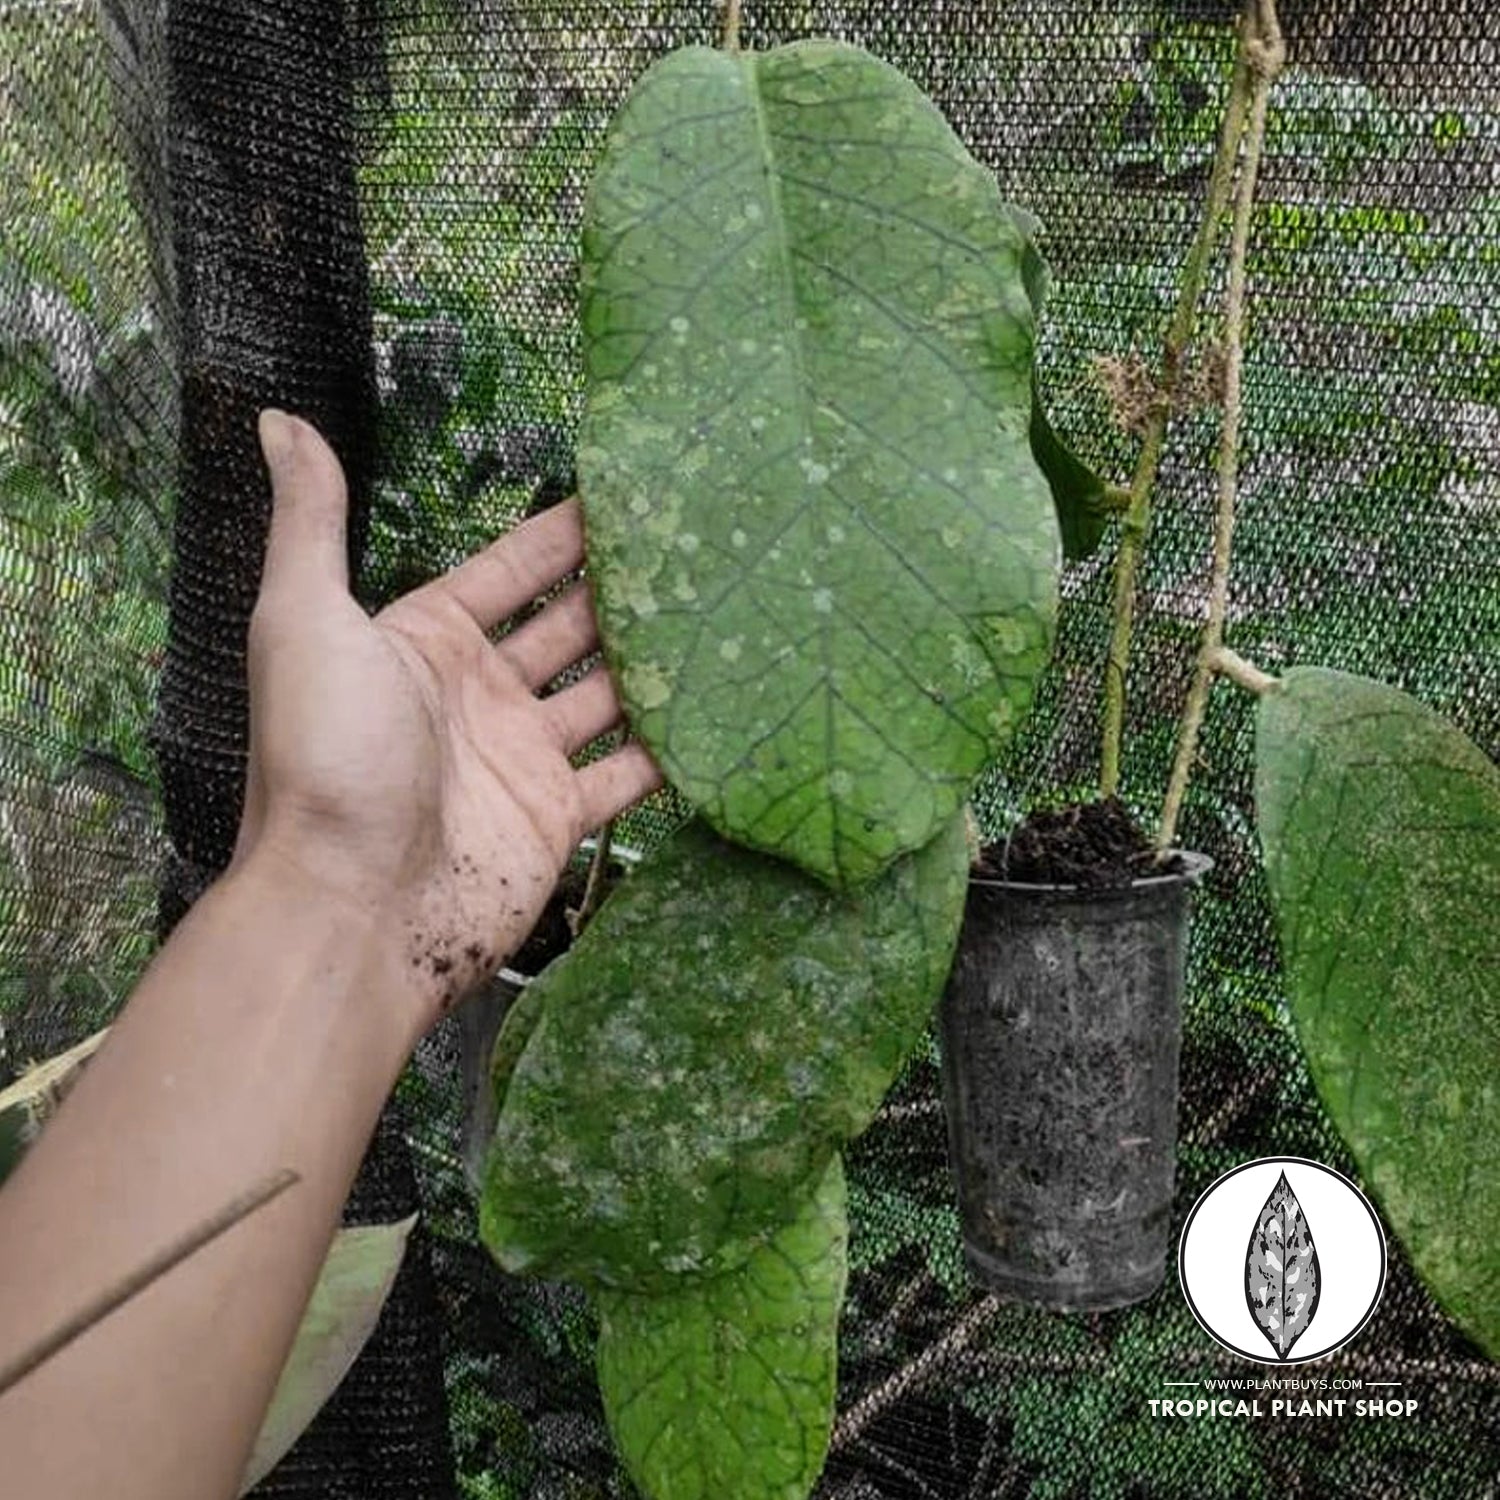 A person hand holding Hoya Meredithii Sp Aceh plant